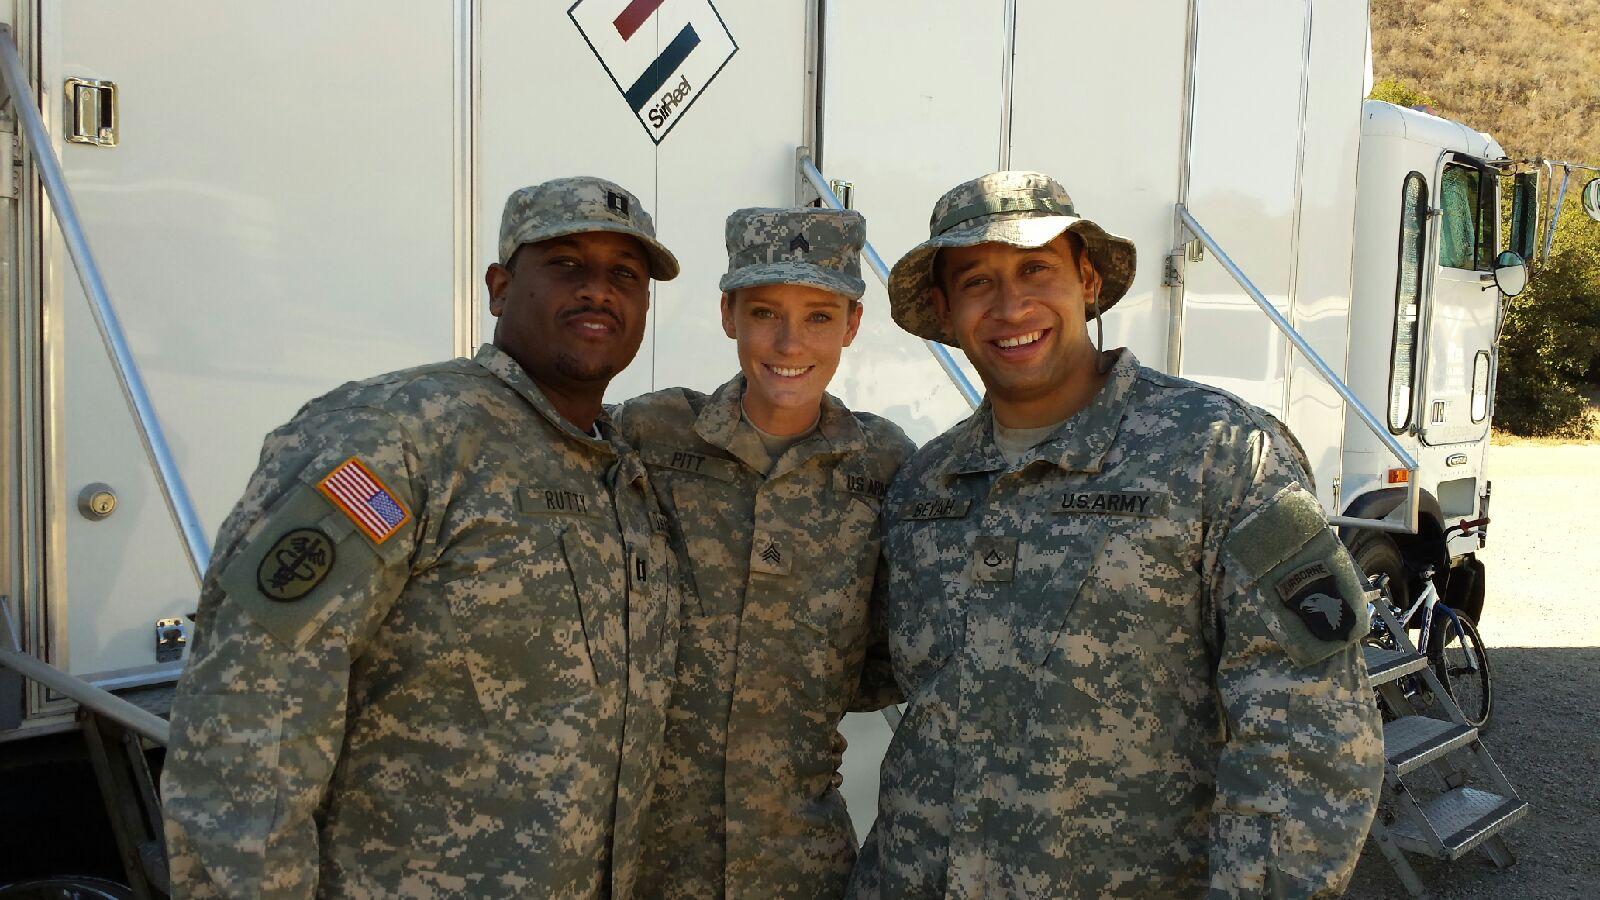 All three actors are military veterans in real life. On the set of Yellow Ribbon.